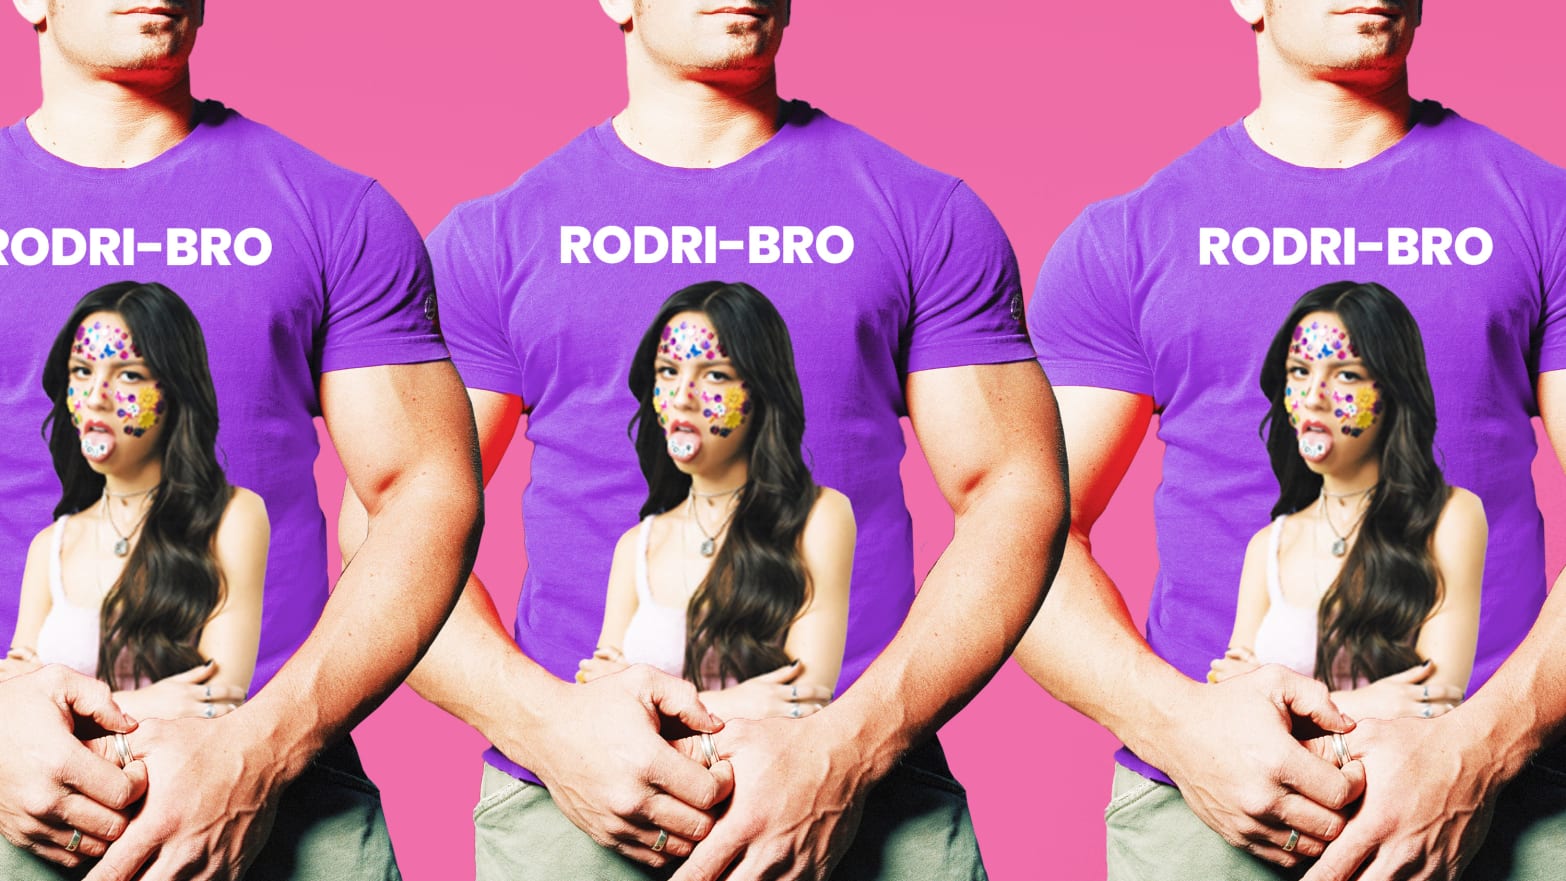 A photo illustration of three muscle men wearing purple shirts with Olivia Rodrigo on them with the word “RODRI-BRO” written on them on a pink background